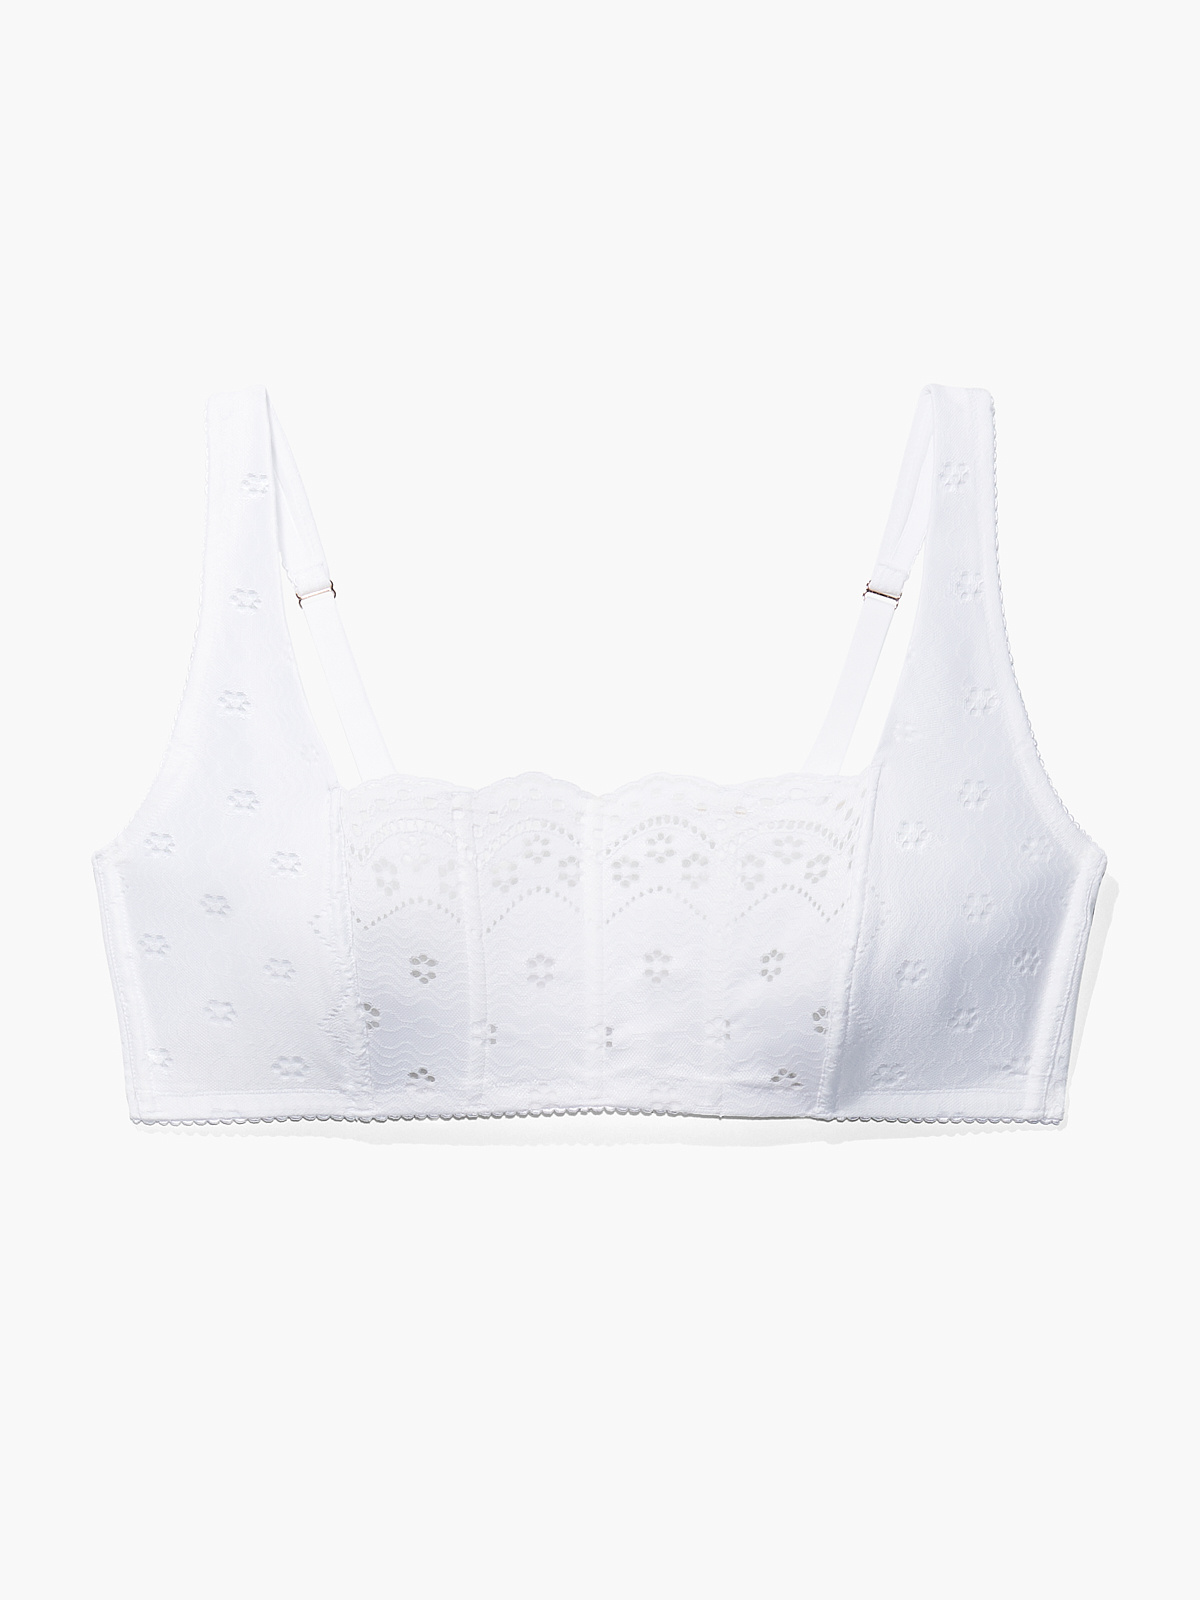 BN SAVAGE X Fenty Not Sorry Half Cup Bra with Lace in White 34B RRP£65  £11.99 - PicClick UK